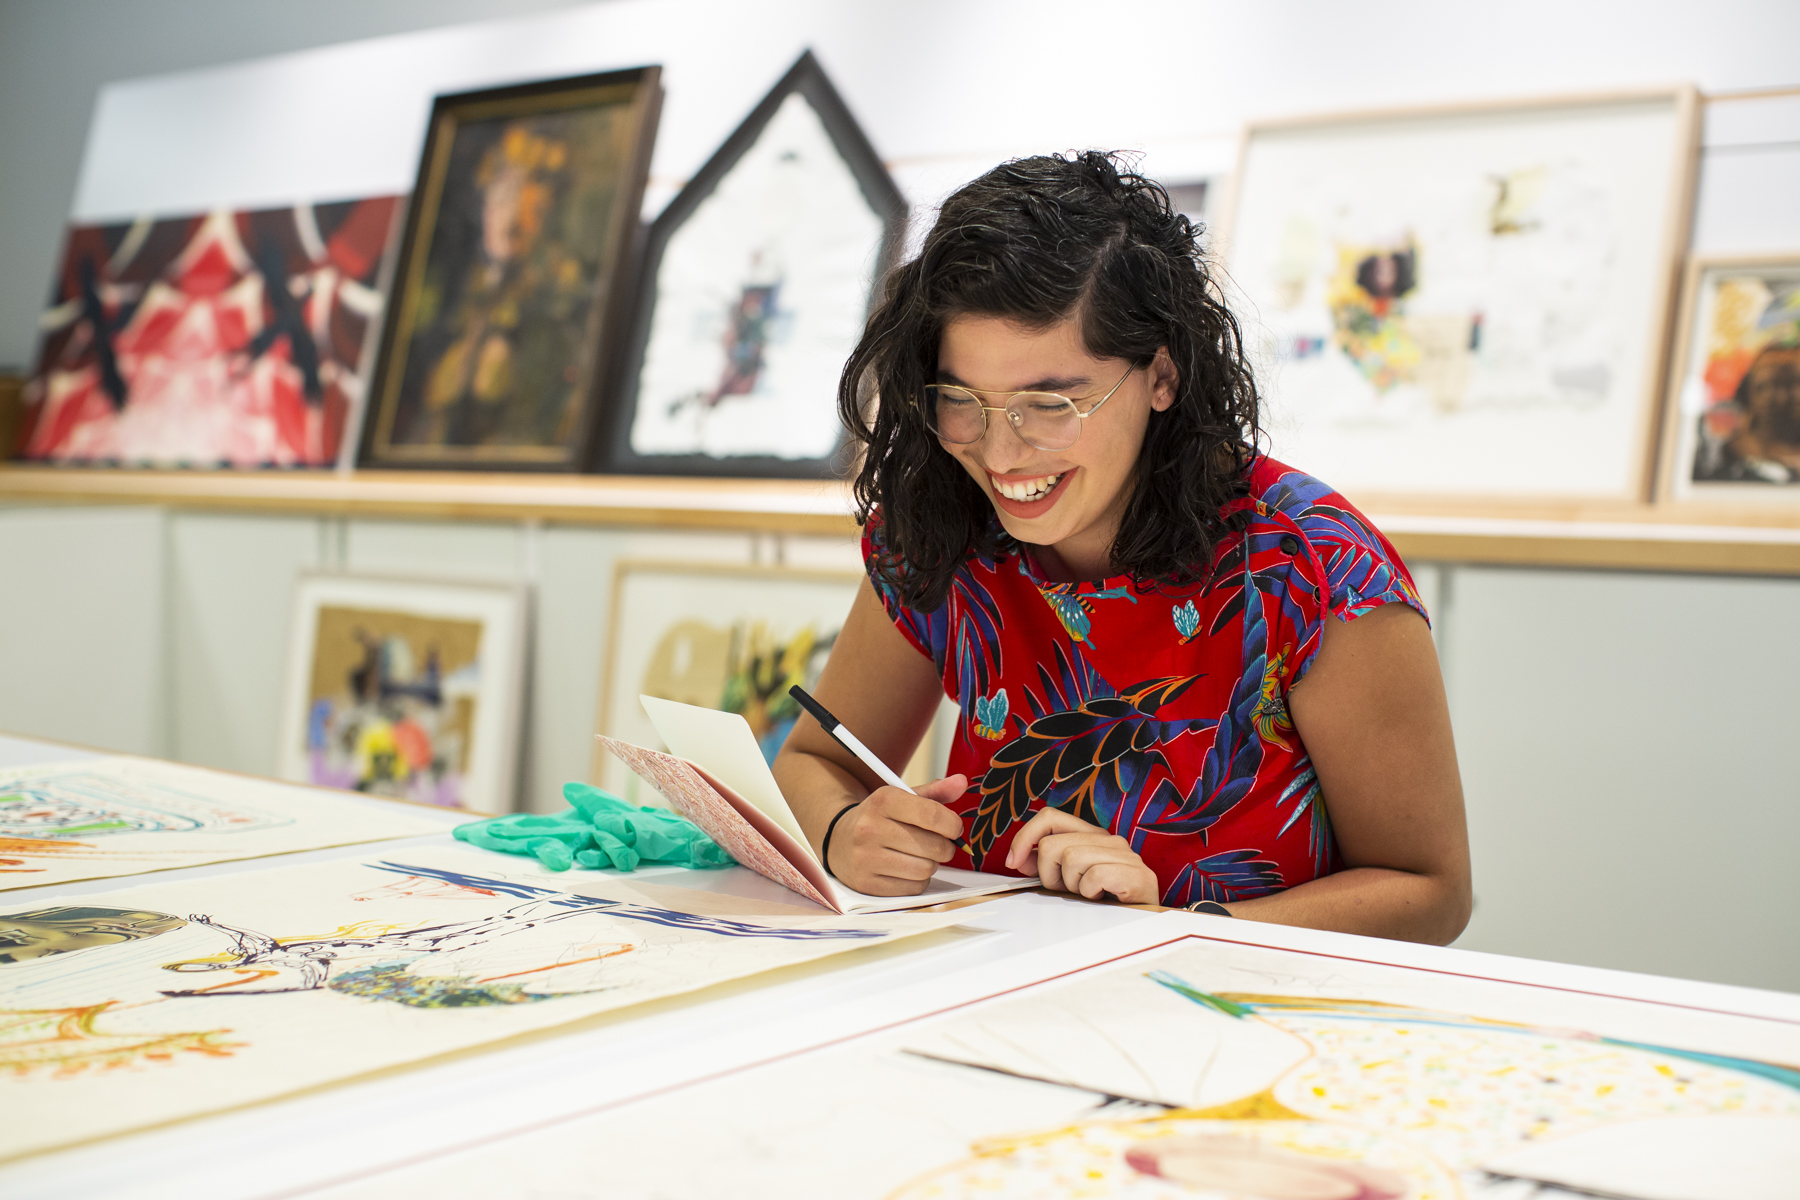 Image: Natasha Mijares smiling and seated at a desk, leaning gently forward. She holds a pen and notebook in her right hand. On the desk are prints and other art works. Behind Natasha are shelves holding artworks. Photograph by Kristie Kahns.